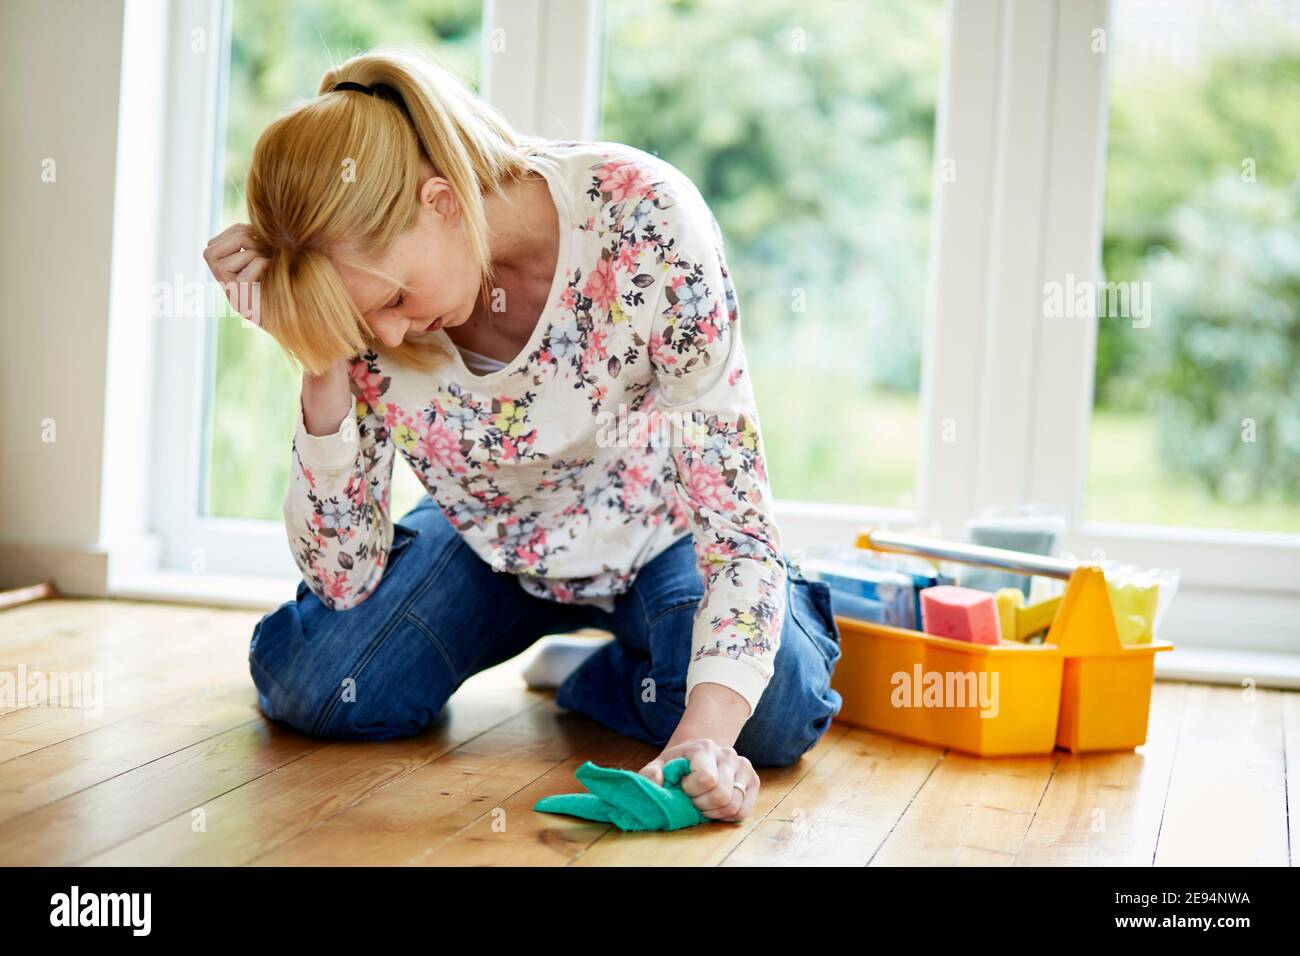 Middle aged woman cleaning Stock Photo